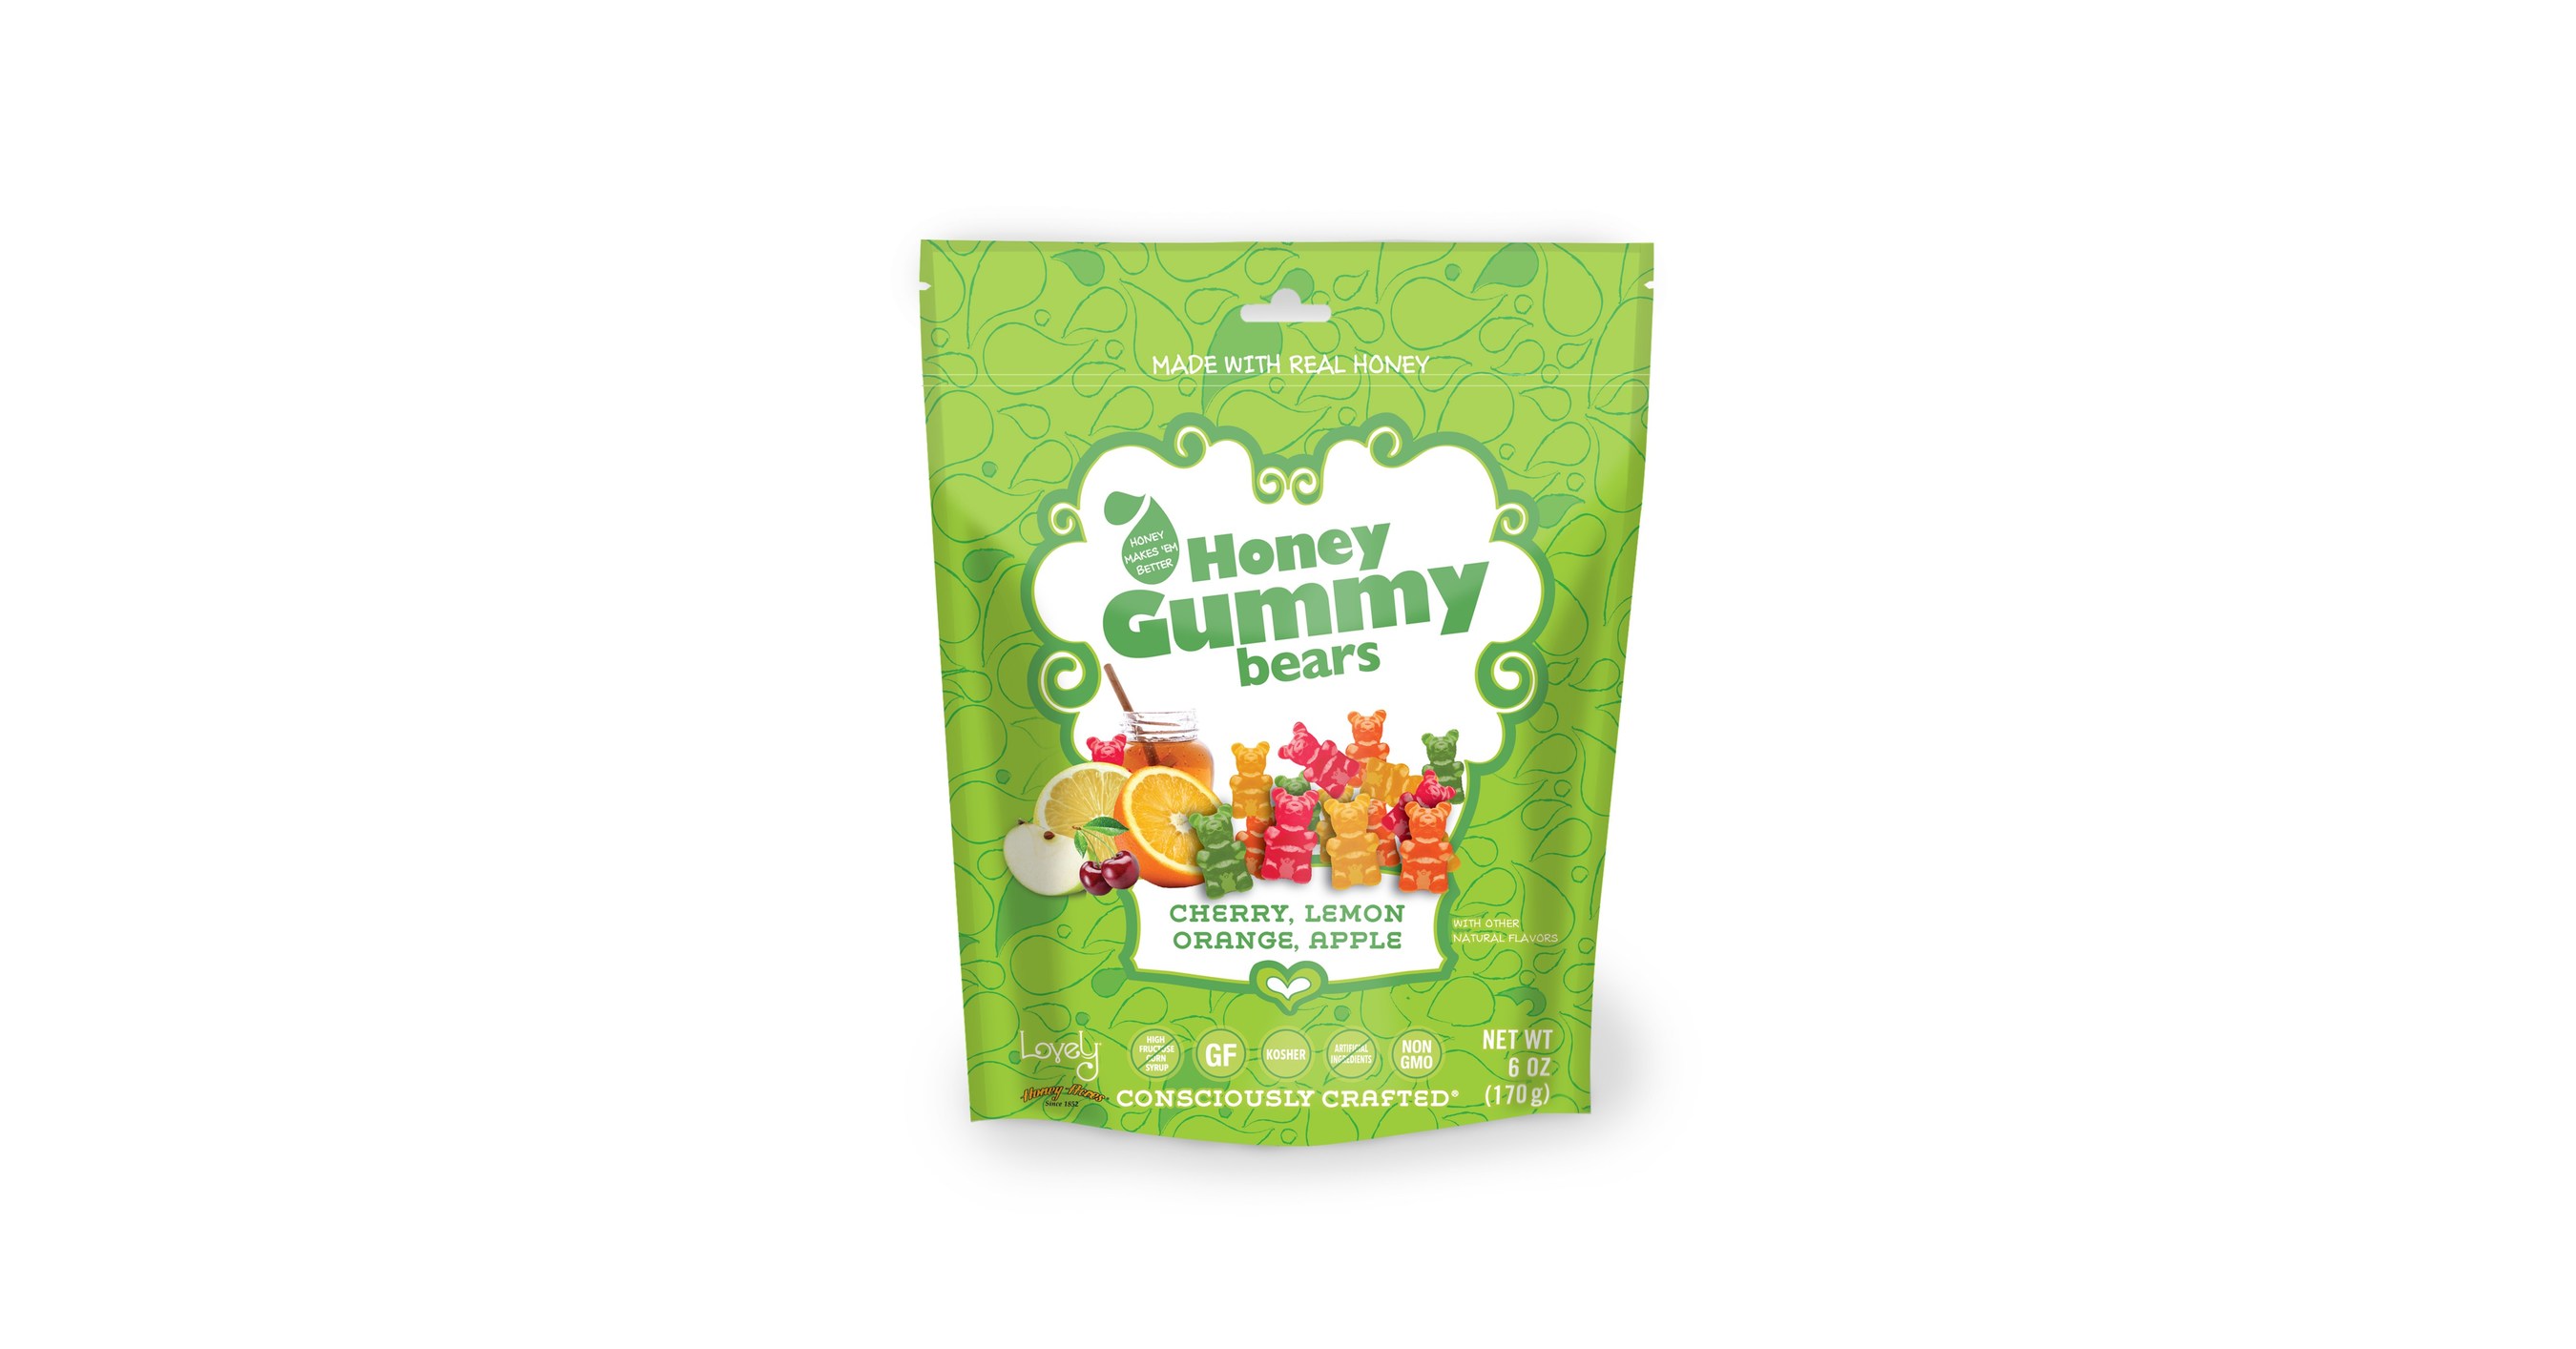 The Lovely Candy Company® Pioneers Honey Gummies